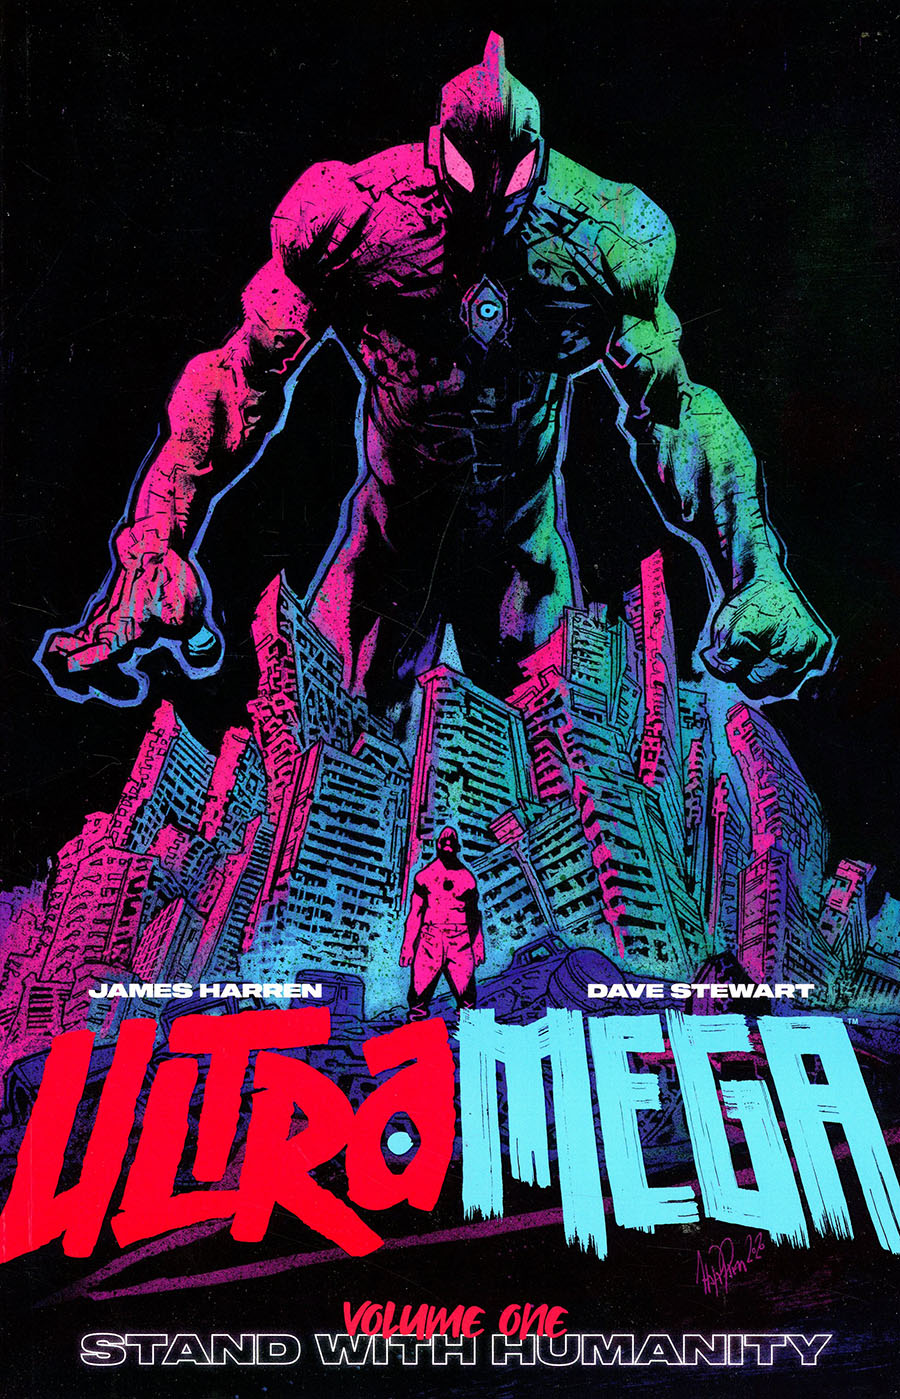 Ultramega By James Harren Vol 1 Stand With Humanity TP